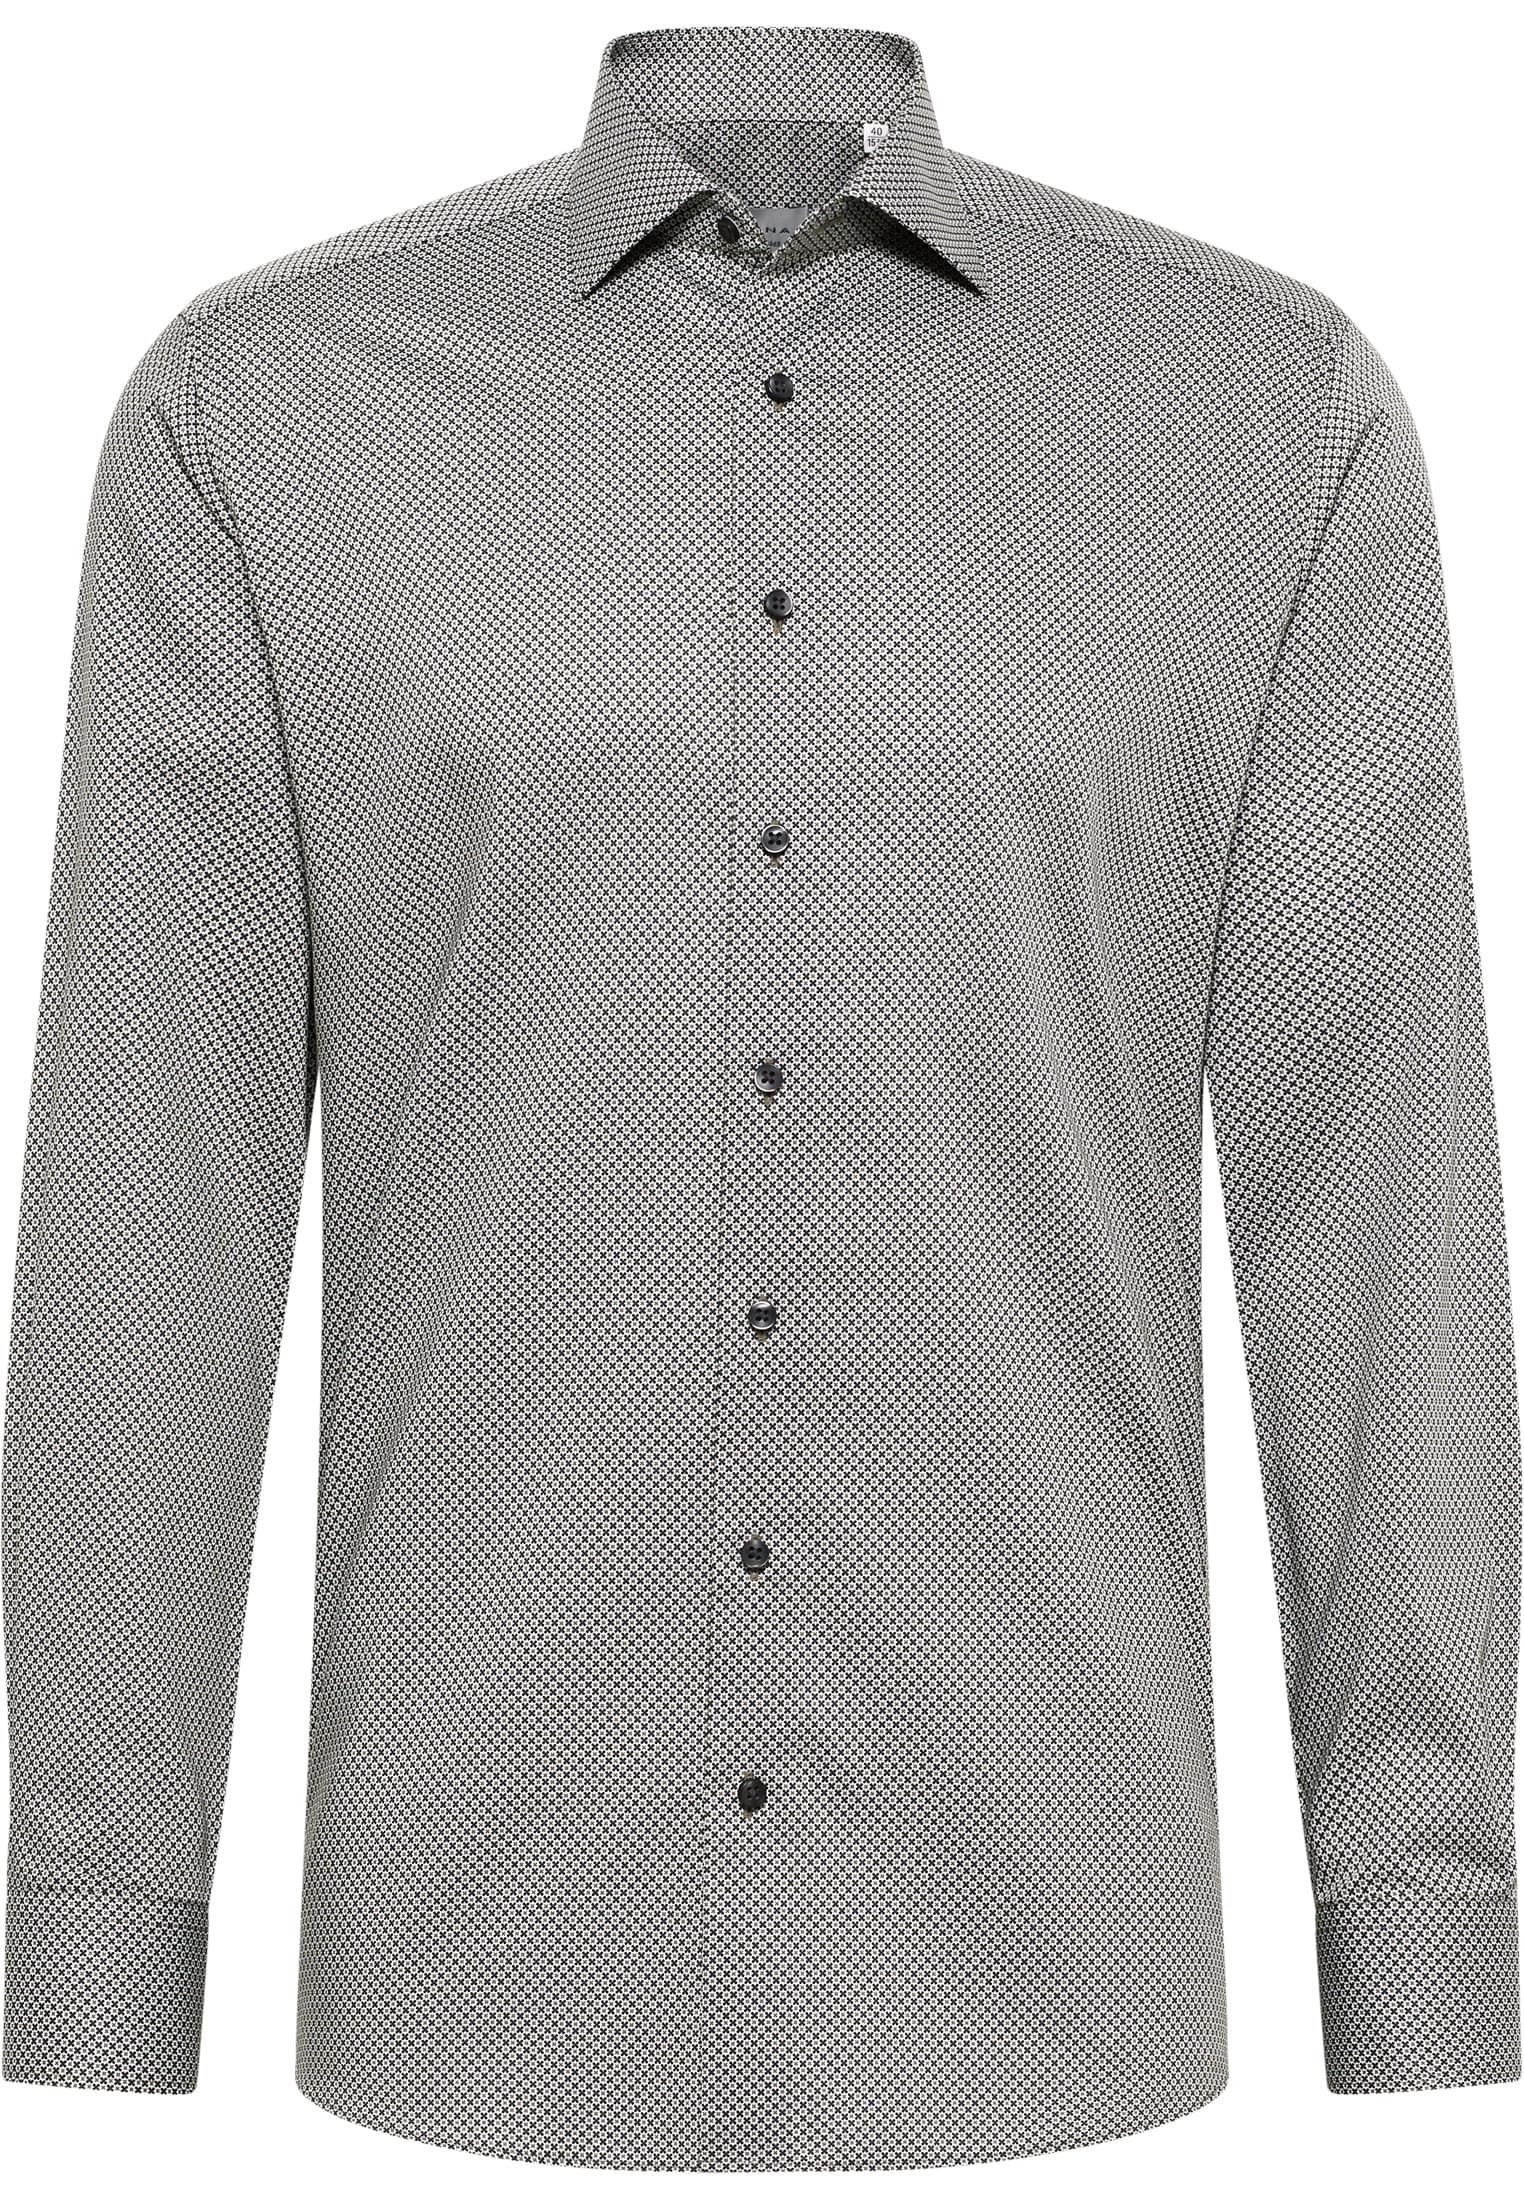 MODERN FIT Shirt in green printed